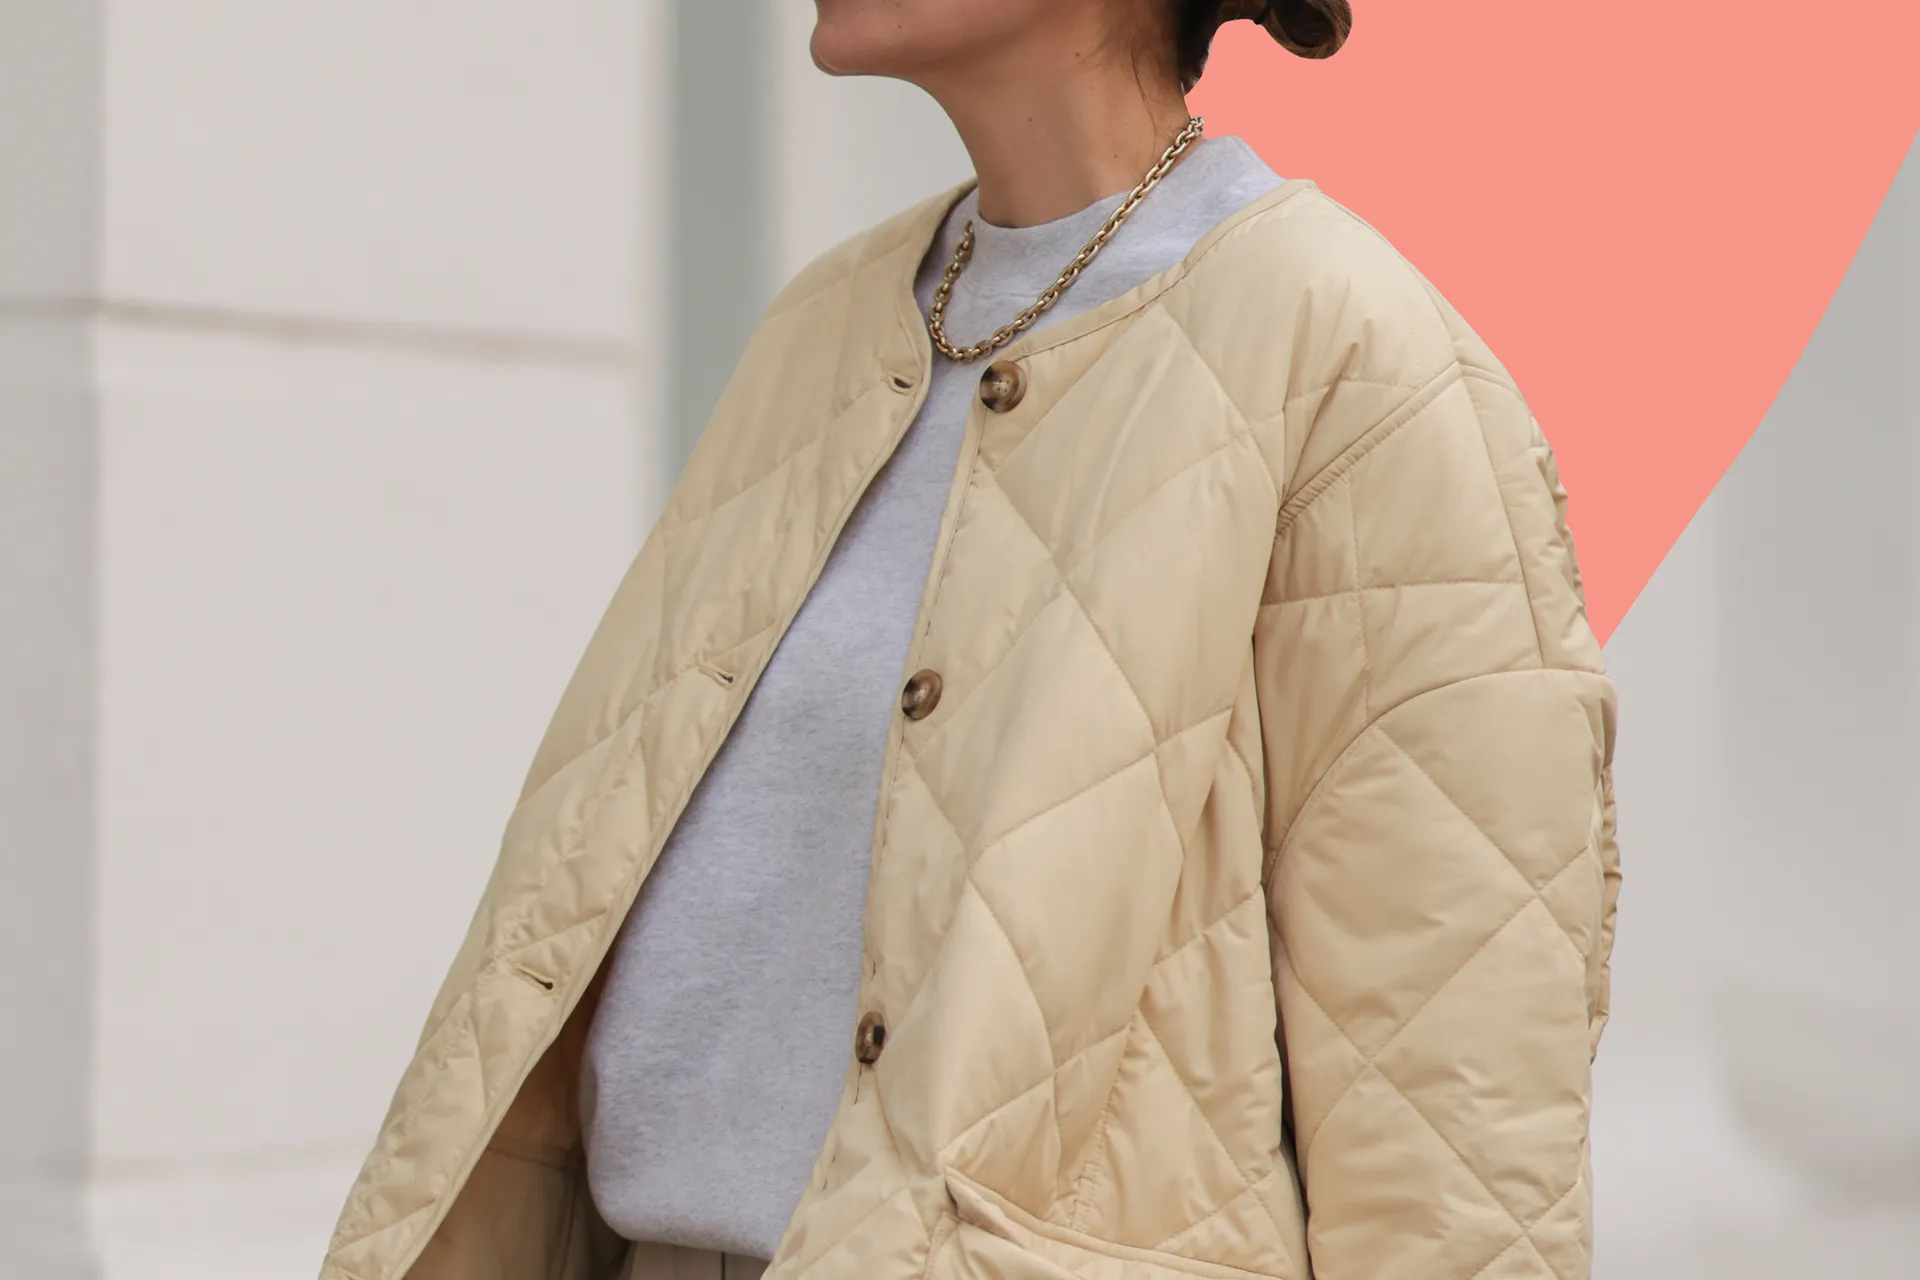 What Types of Women Quilted Jacket is Best for?